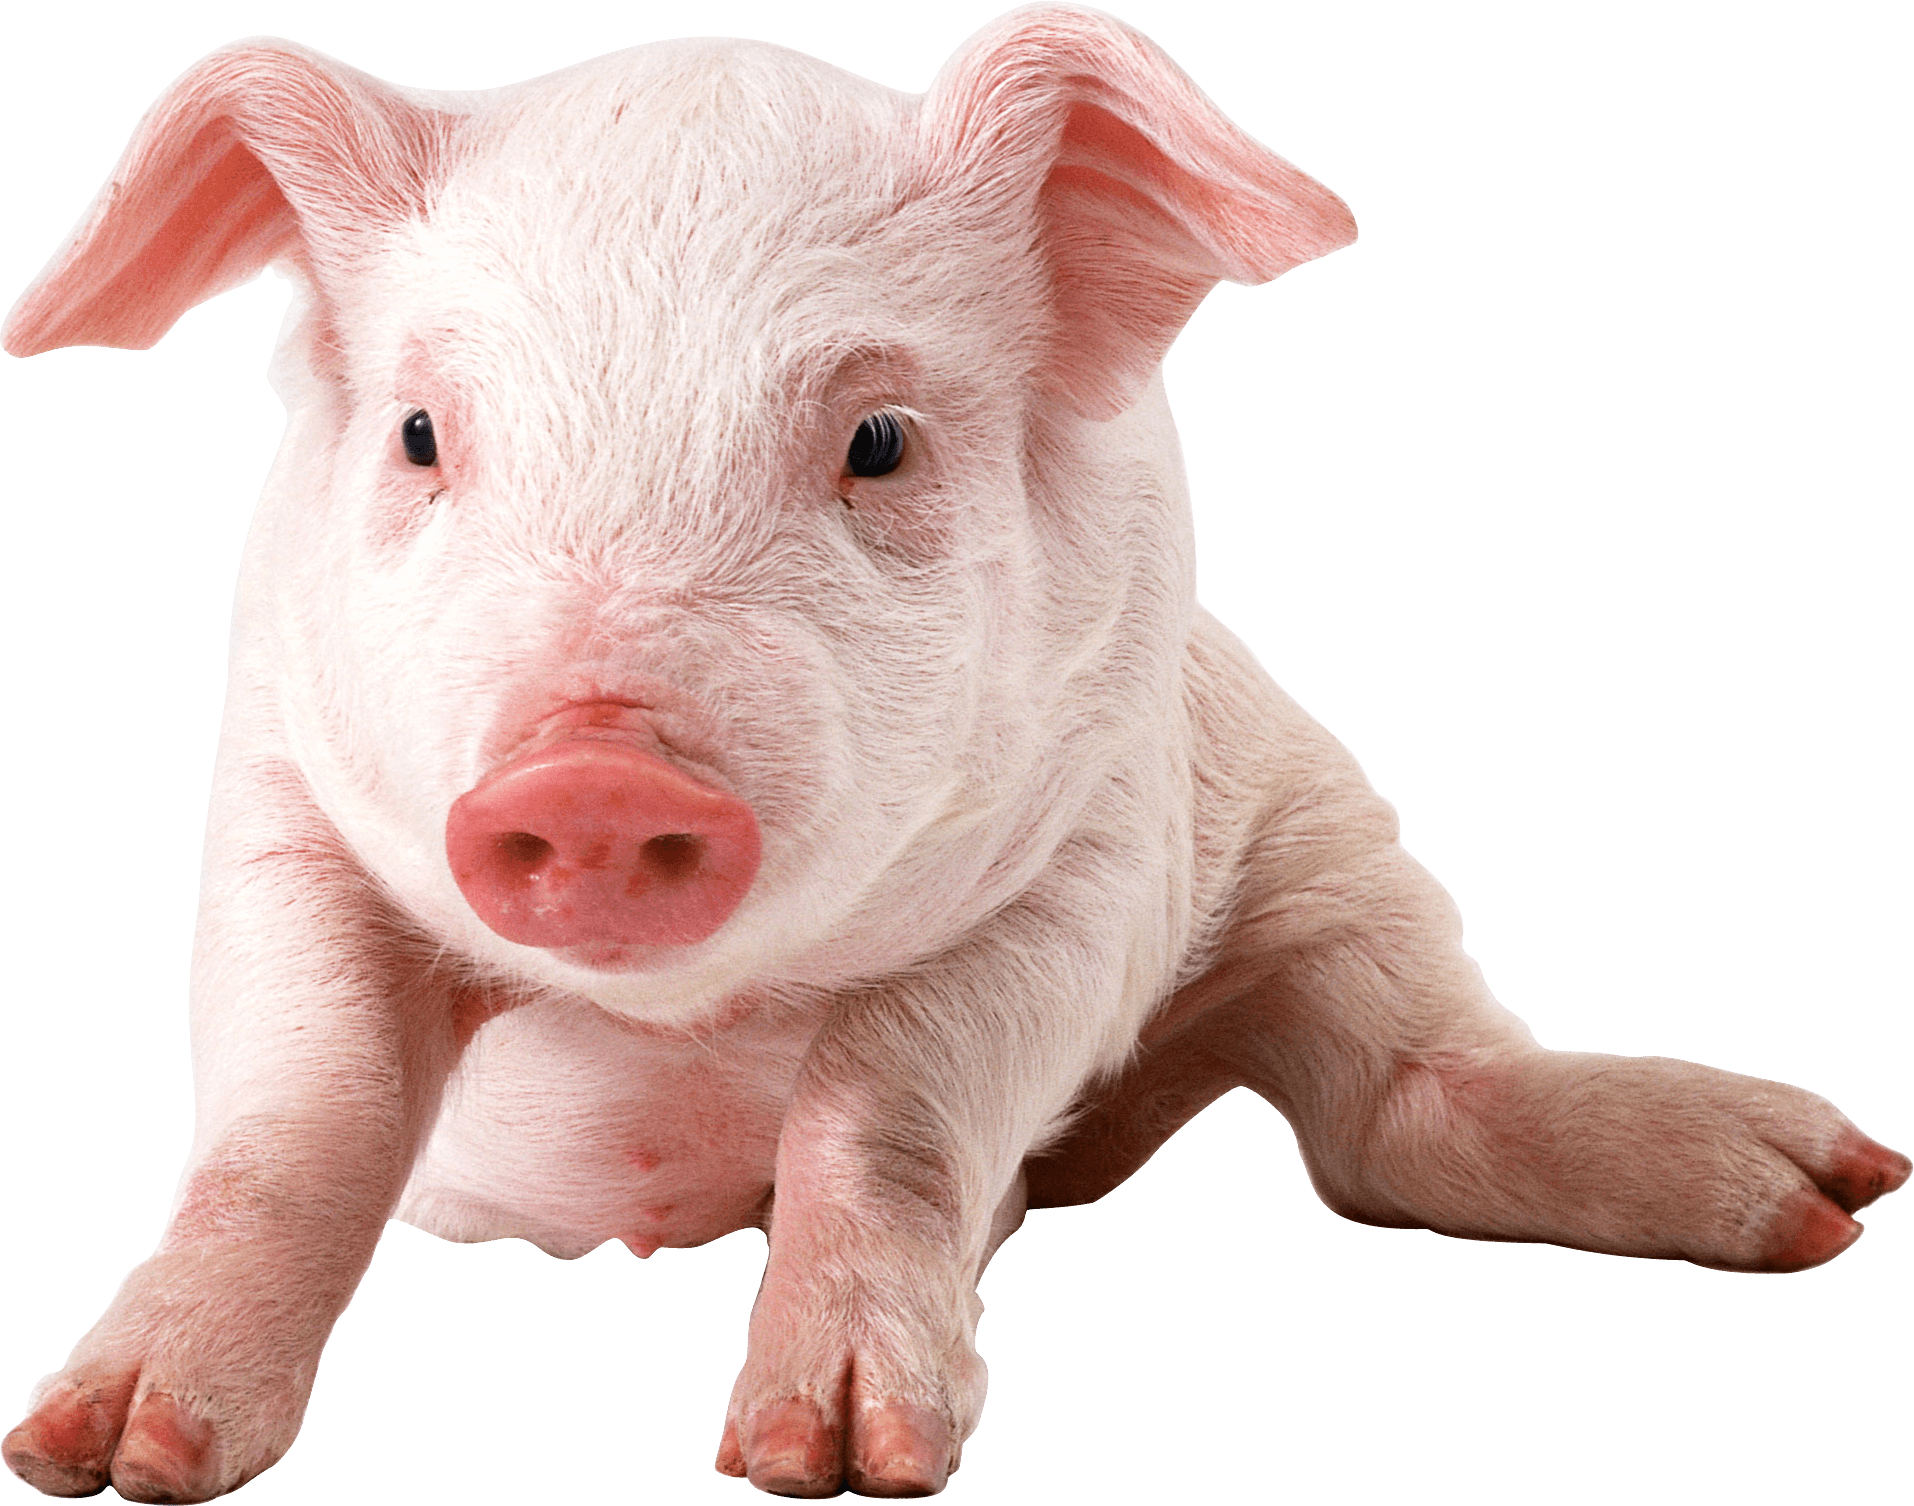 Baby Pig Sitting   Pig Hd Png - Baby Pig, Transparent background PNG HD thumbnail